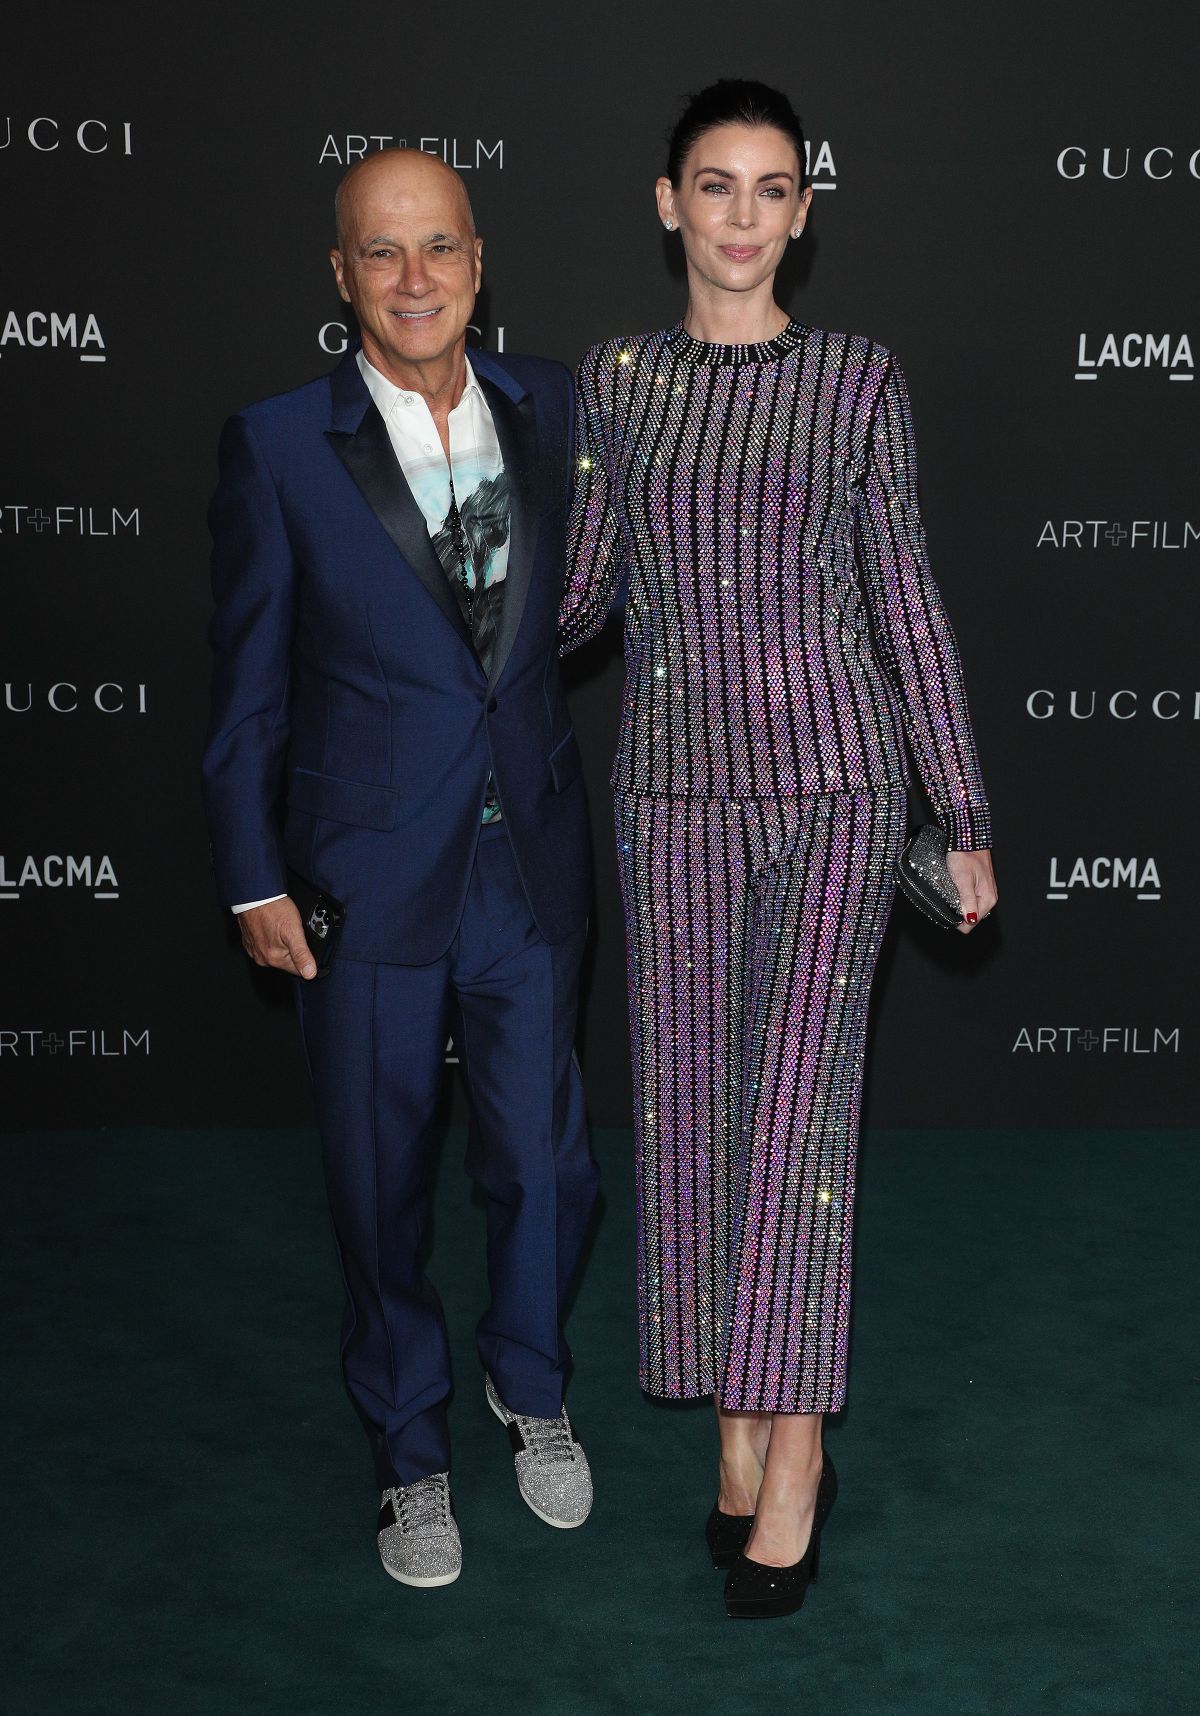 liberty-ross-at-10th-annual-lacma-art-film-gala-in-los-angeles-11-06-2021-1.jpg